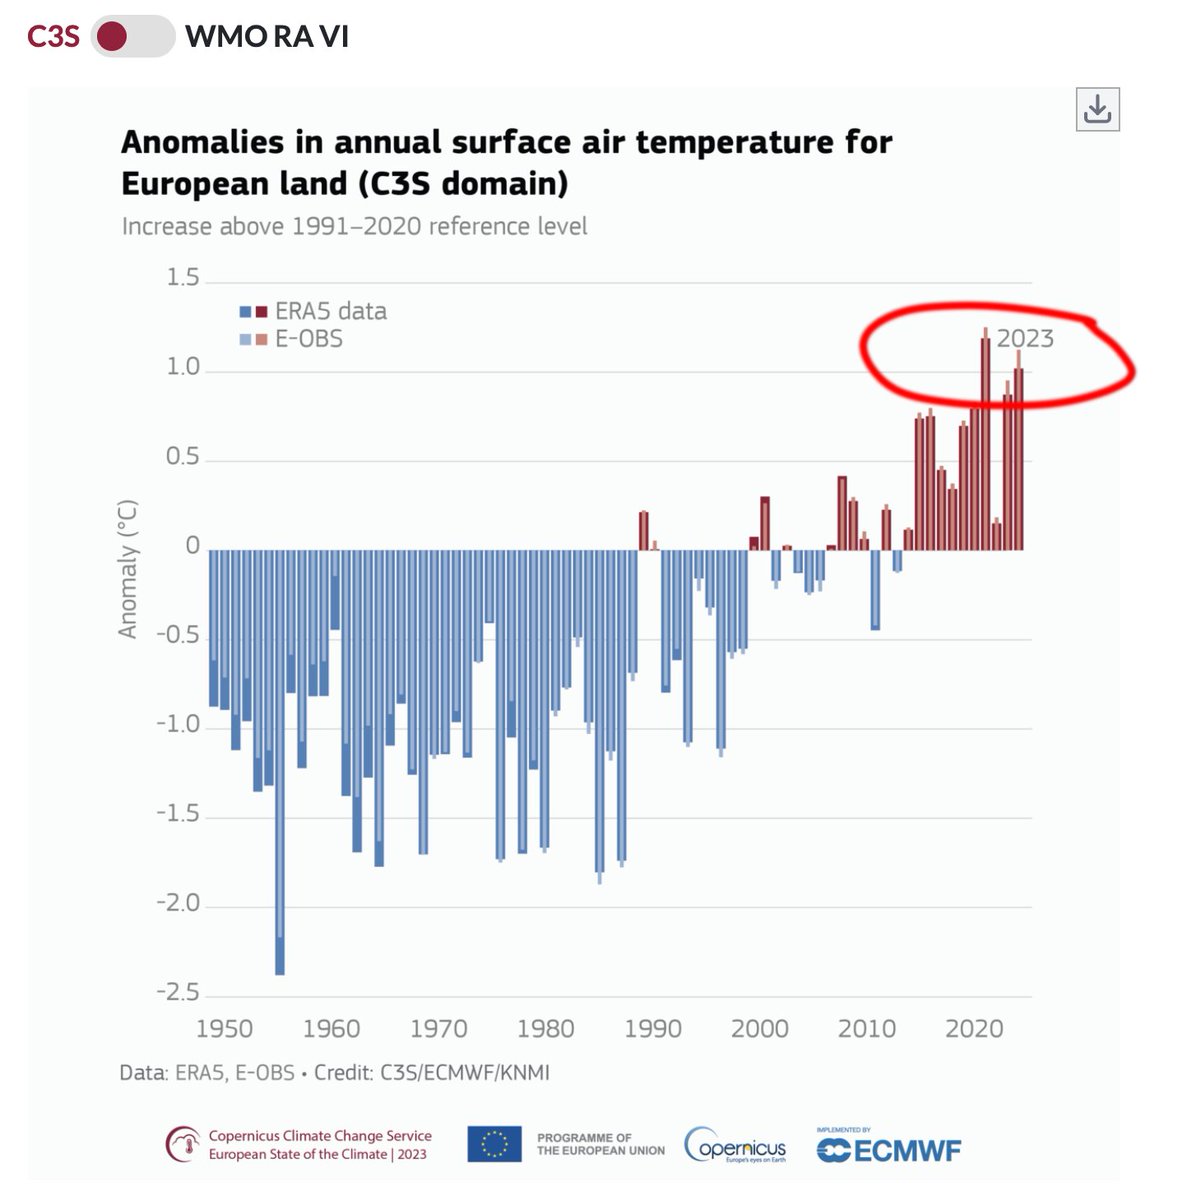 Cooling is warming: Accepting this new @WMO/@CopernicusECMWF report at face value, Europe has cooled since 2016 despite 500 billion tons of global emissions. climate.copernicus.eu/esotc/2023/tem… If every emission causes warming, how is that possible?